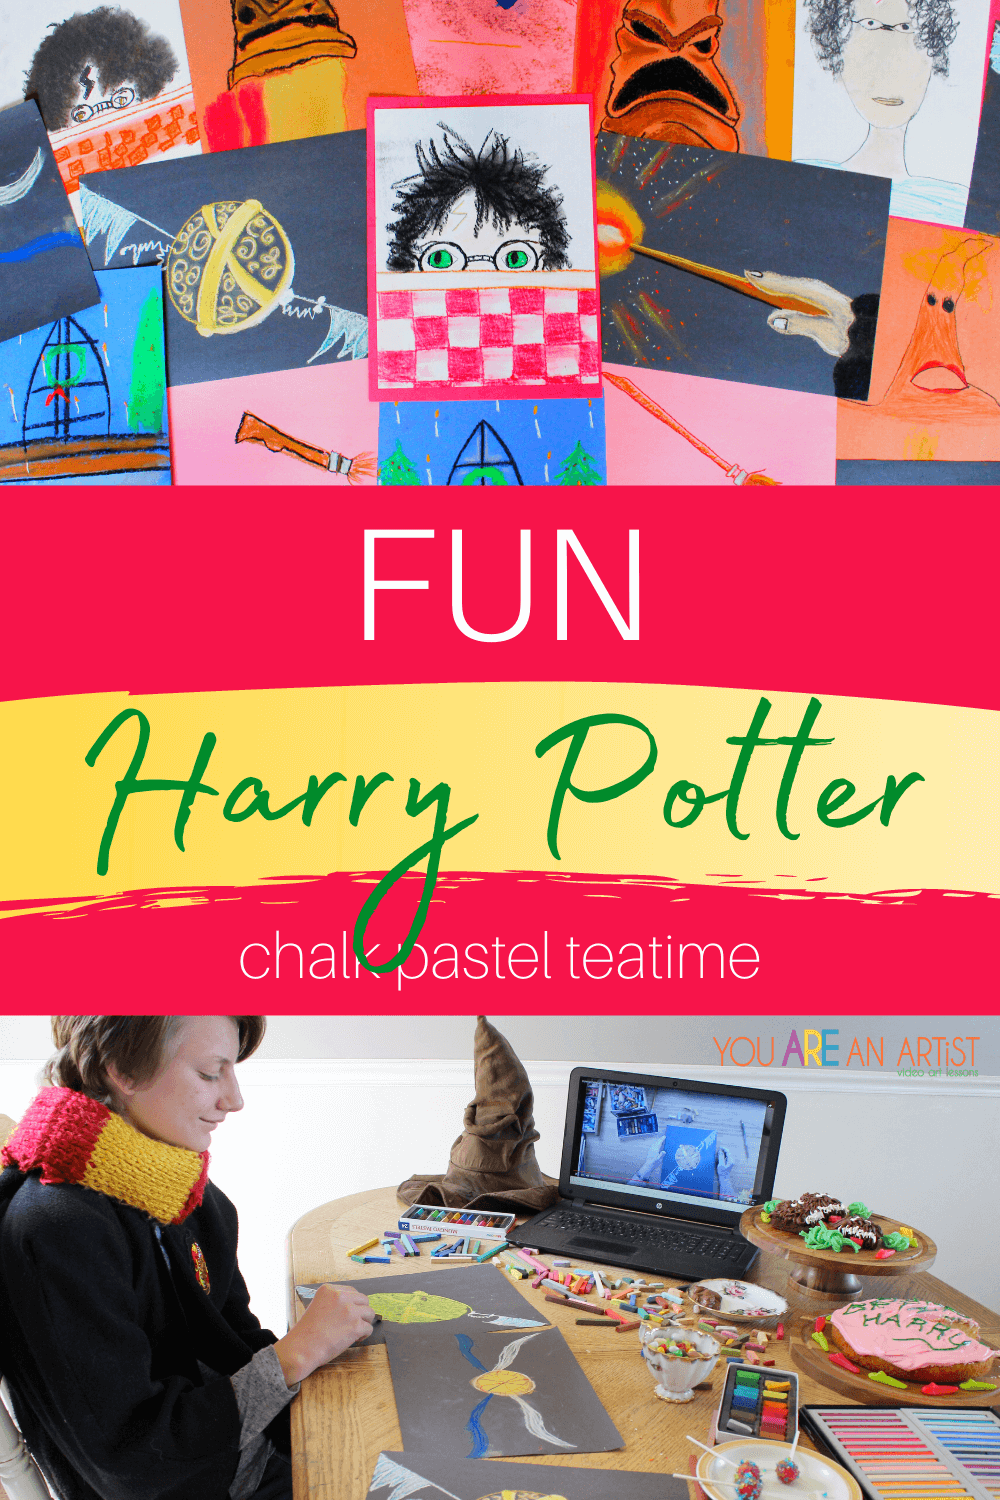 Fun Harry Potter Chalk Pastel Teatime: Check out this fun Harry Potter chalk pastel teatime that even muggles will love! You'll find magical art lessons that everyone in the family will enjoy. You don't have to have a magic wand or spellbook. All you need is a simple set of chalk pastels, a pack of construction paper, and the teatime treats of your choice to bring the magic of art and Harry Potter into your home! #HarryPotter #HarryPotterart #HarryPotterartforkids #HarryPotterchalkpastels #HarryPotterchalkpastelteatime #chalkpastelteatime #chalkpastelatthemovies #videoartlessons #YouAREAnArtistClubhouseMembership #YouAREAnArtist